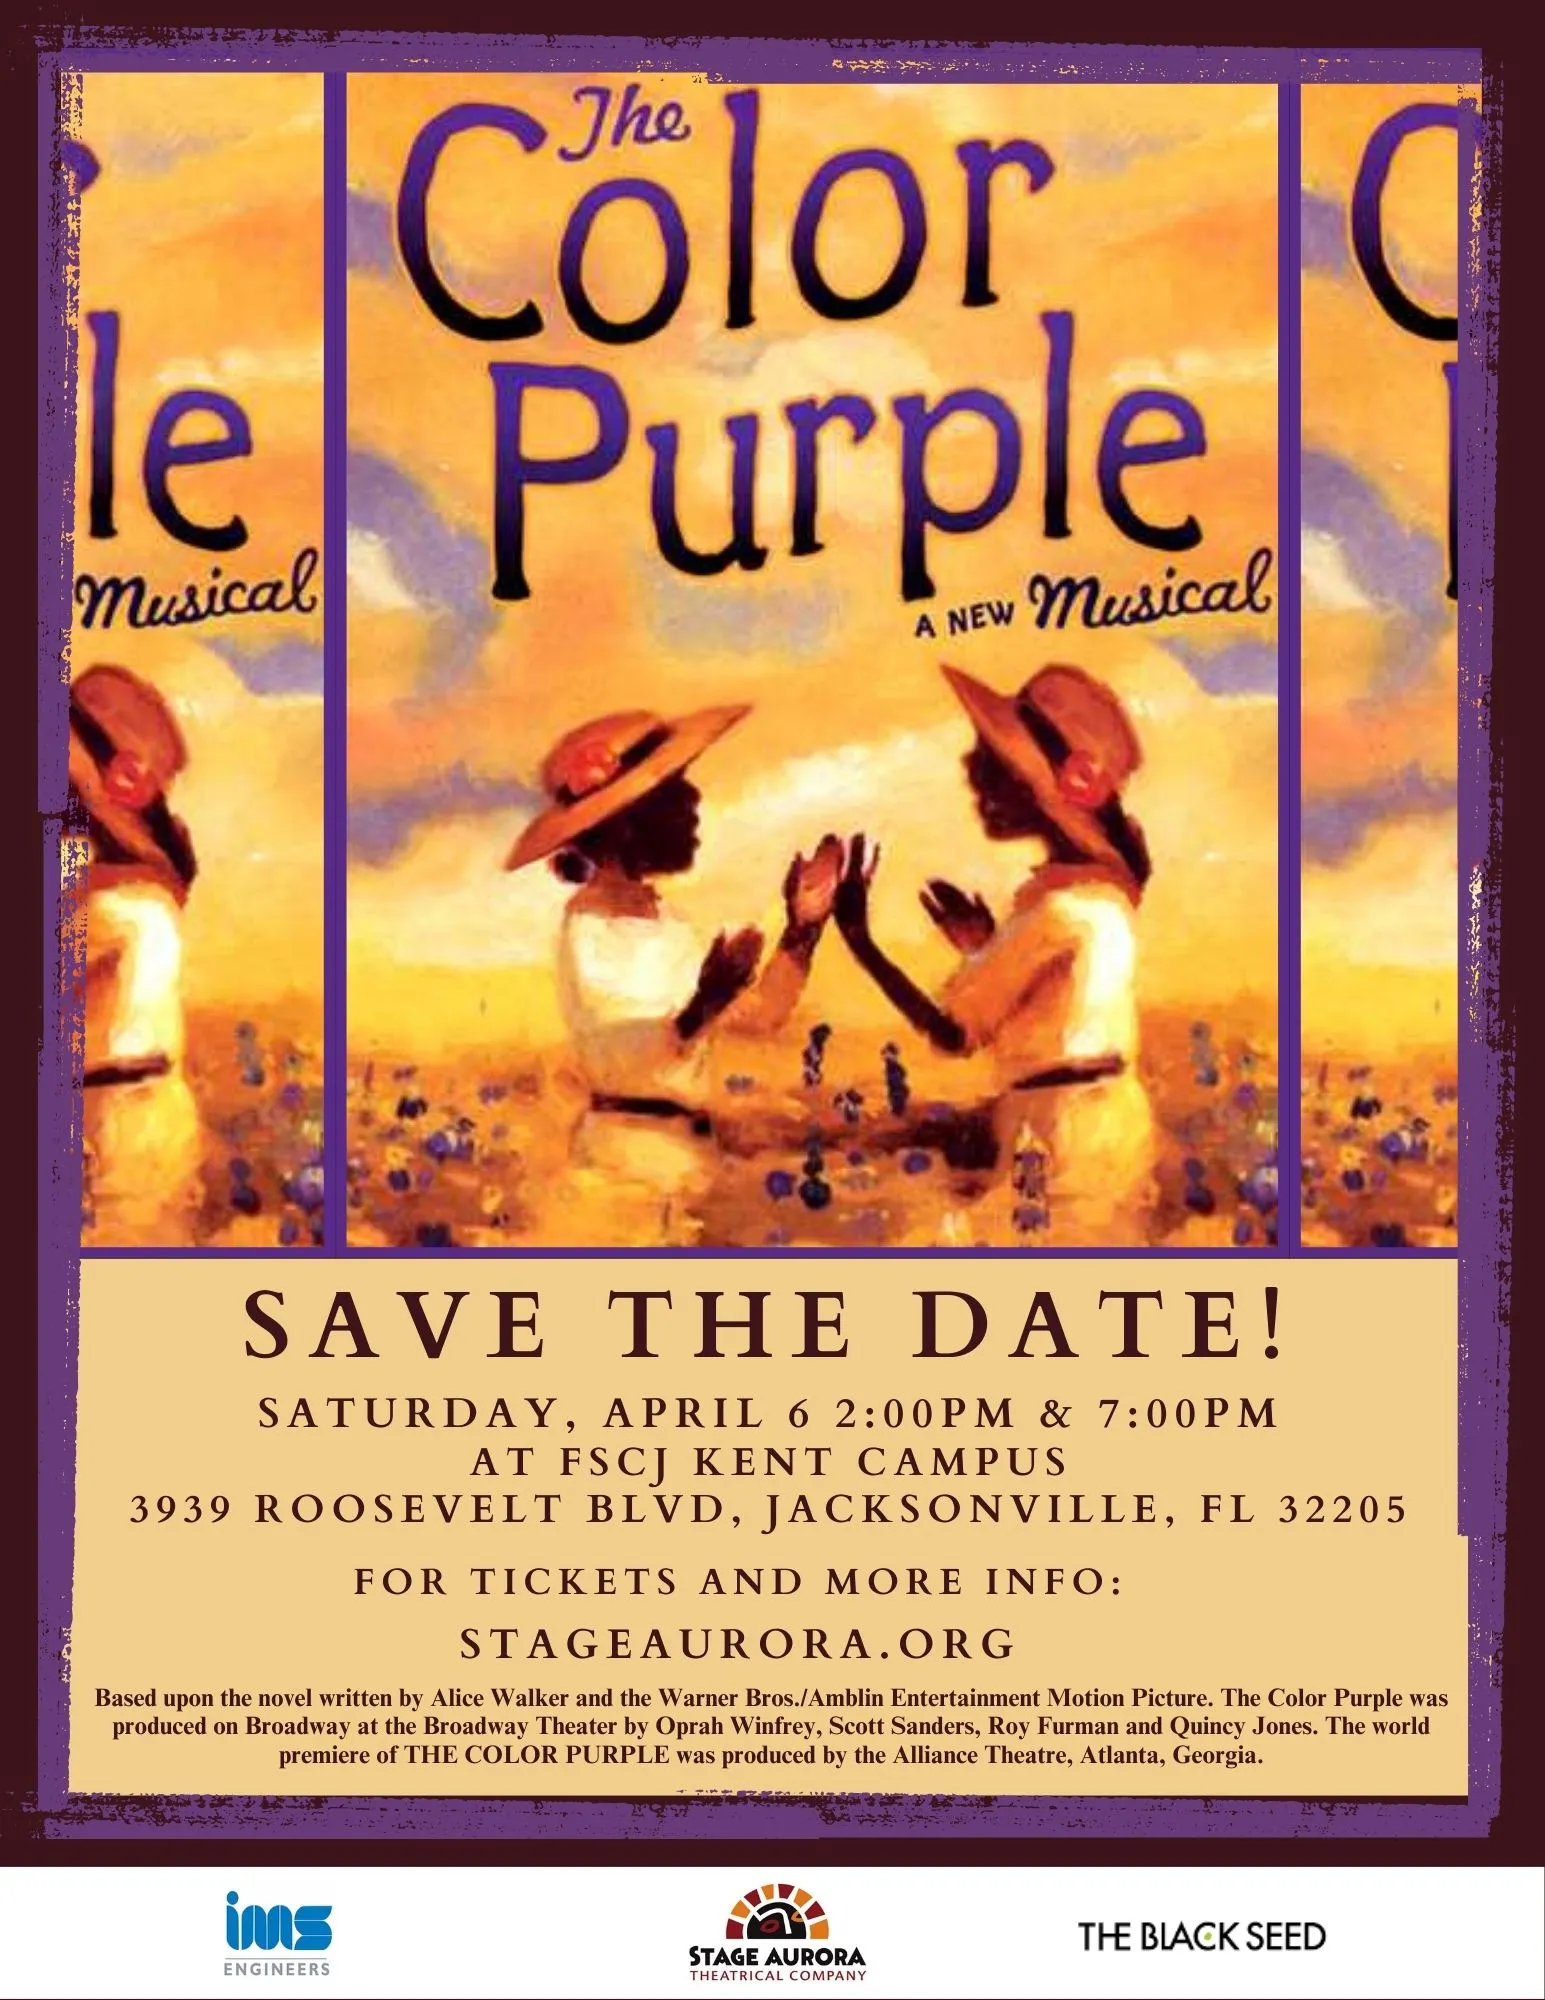 image from The Color Purple